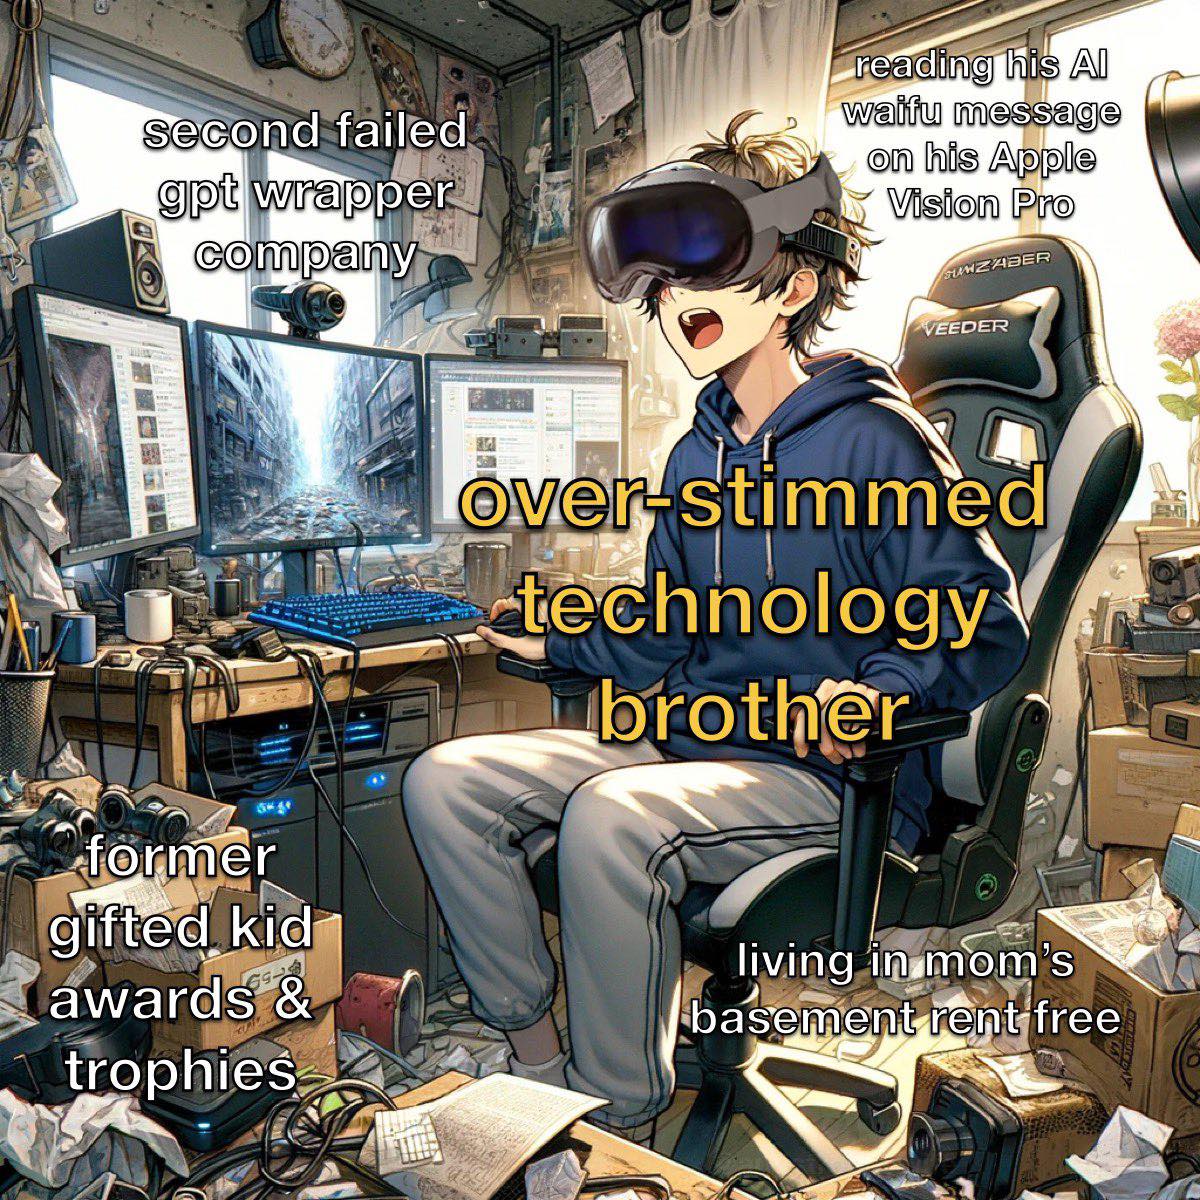 Replace the tech with Google stuff and it's me